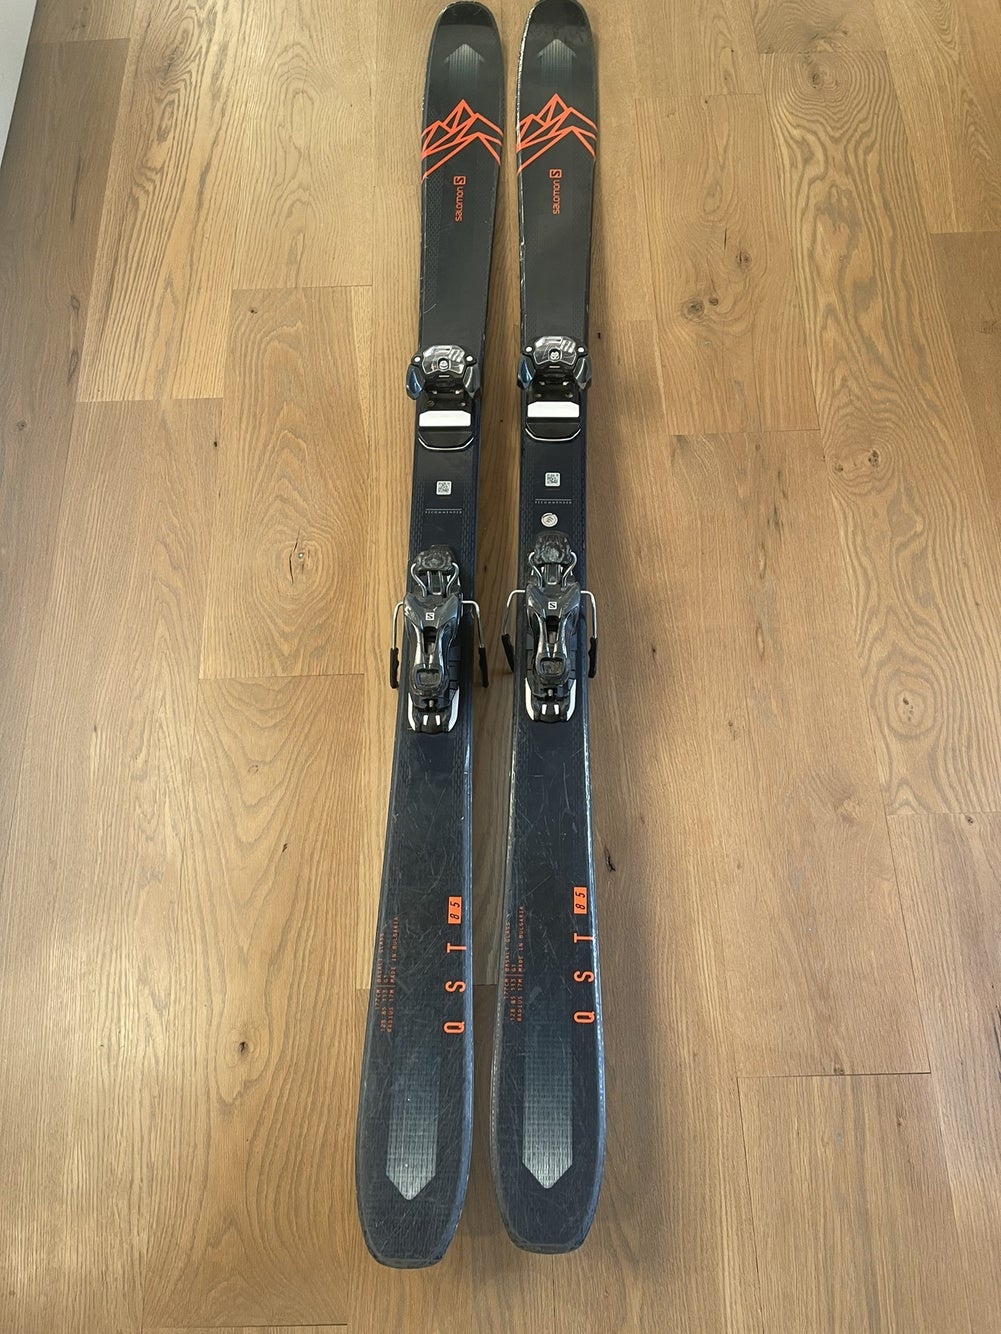 Used 2018 Salomon QST 92 Skis with Warden 13 Bindings Silver Condition